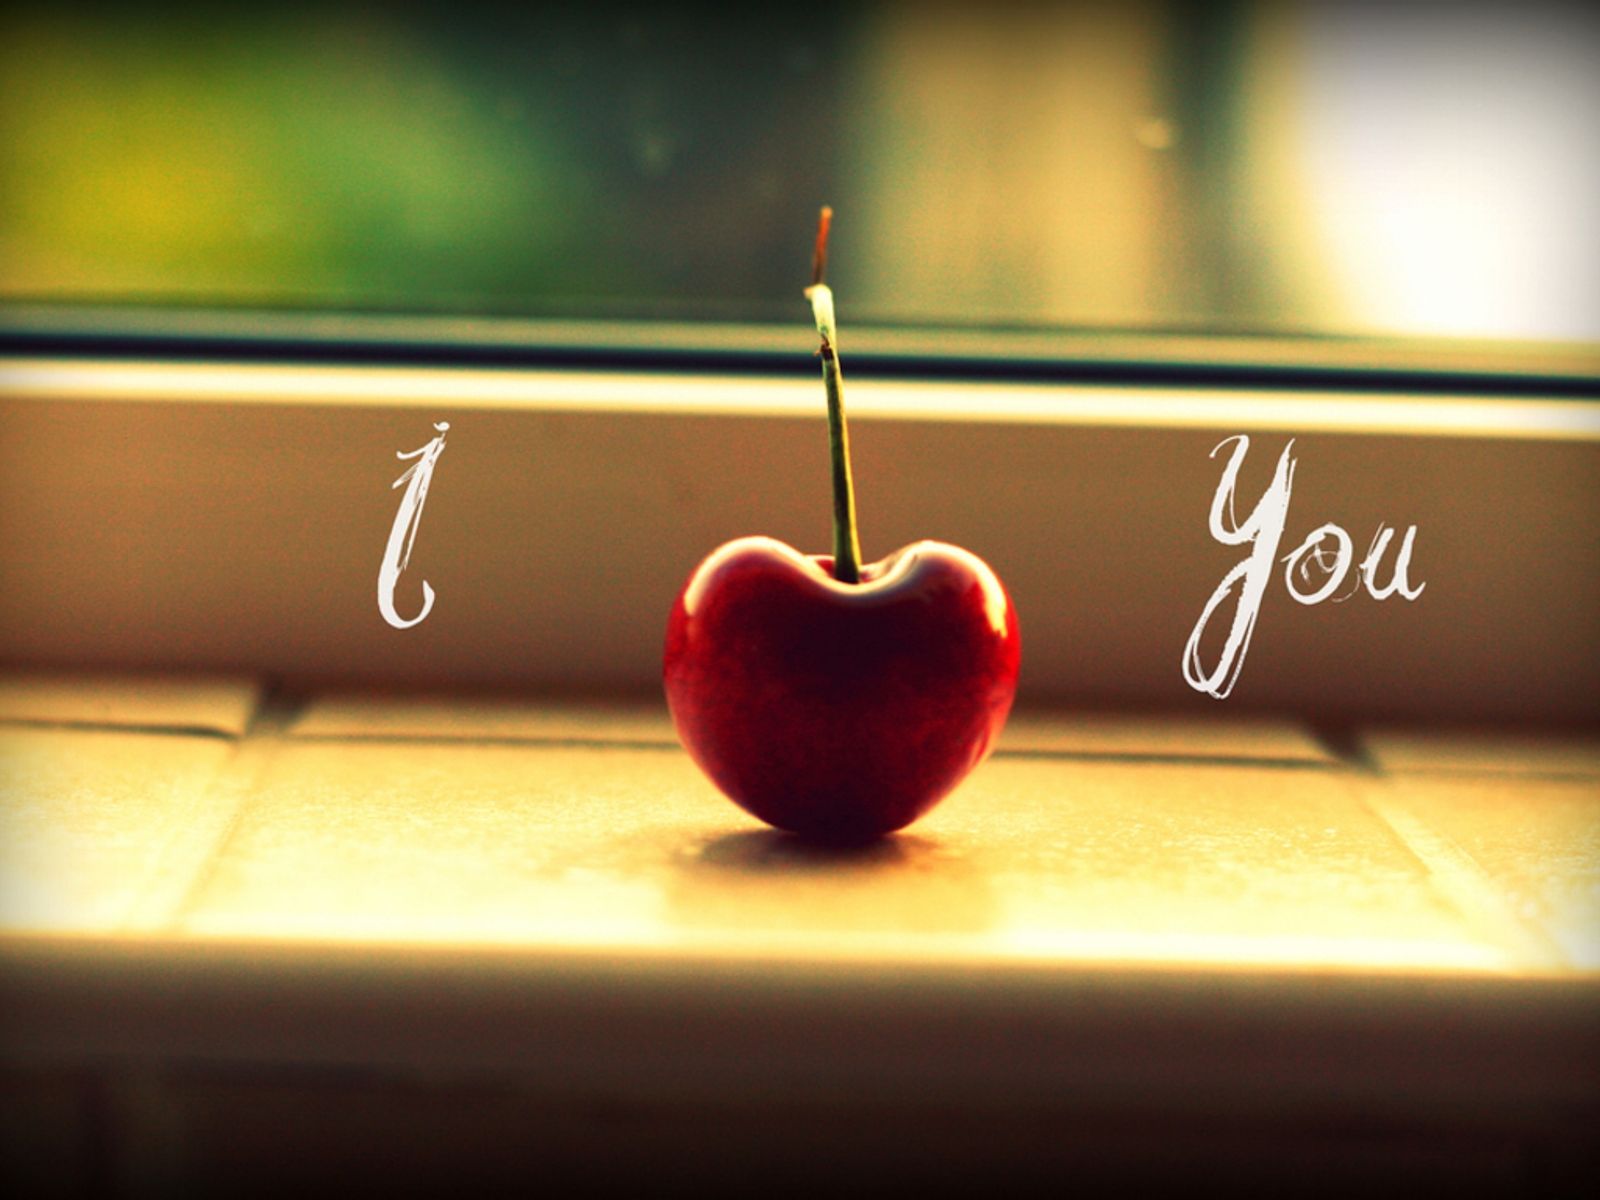 I Love You Wallpapers For Facebook - wallpaper.